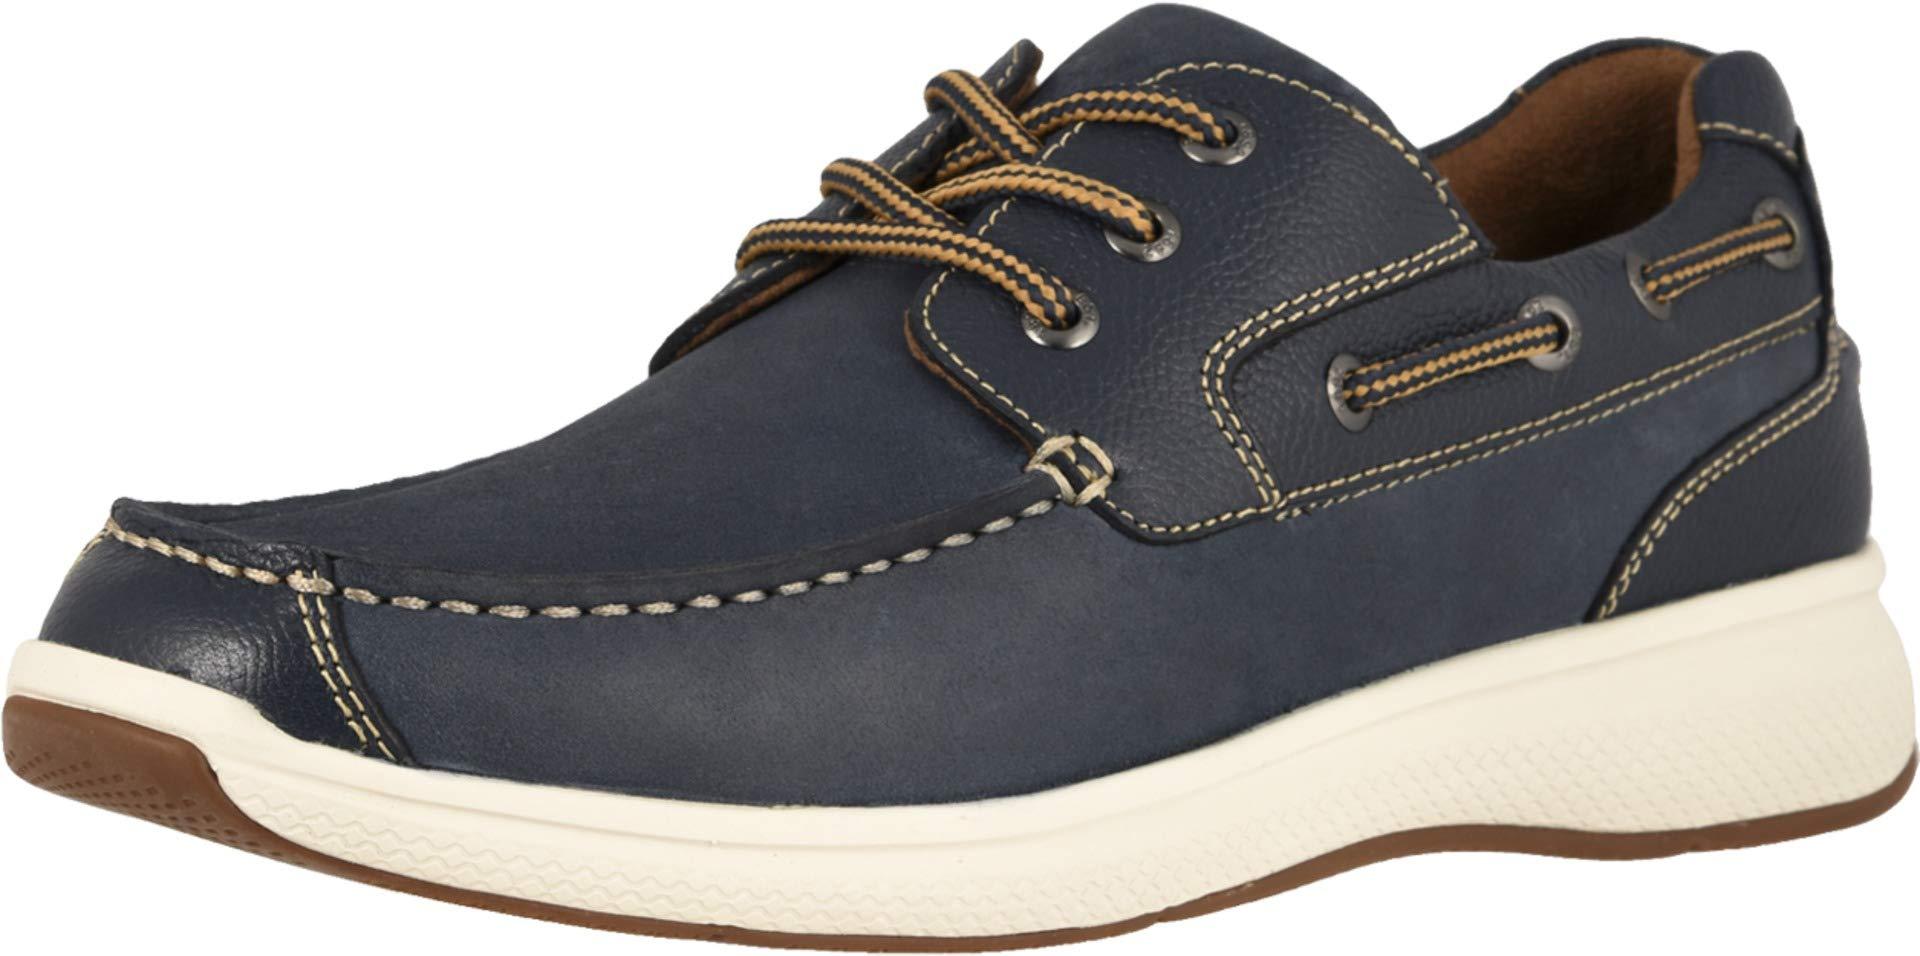 Florsheim Leather Great Lakes Moc Toe Oxford in Navy (Blue) for Men - Lyst